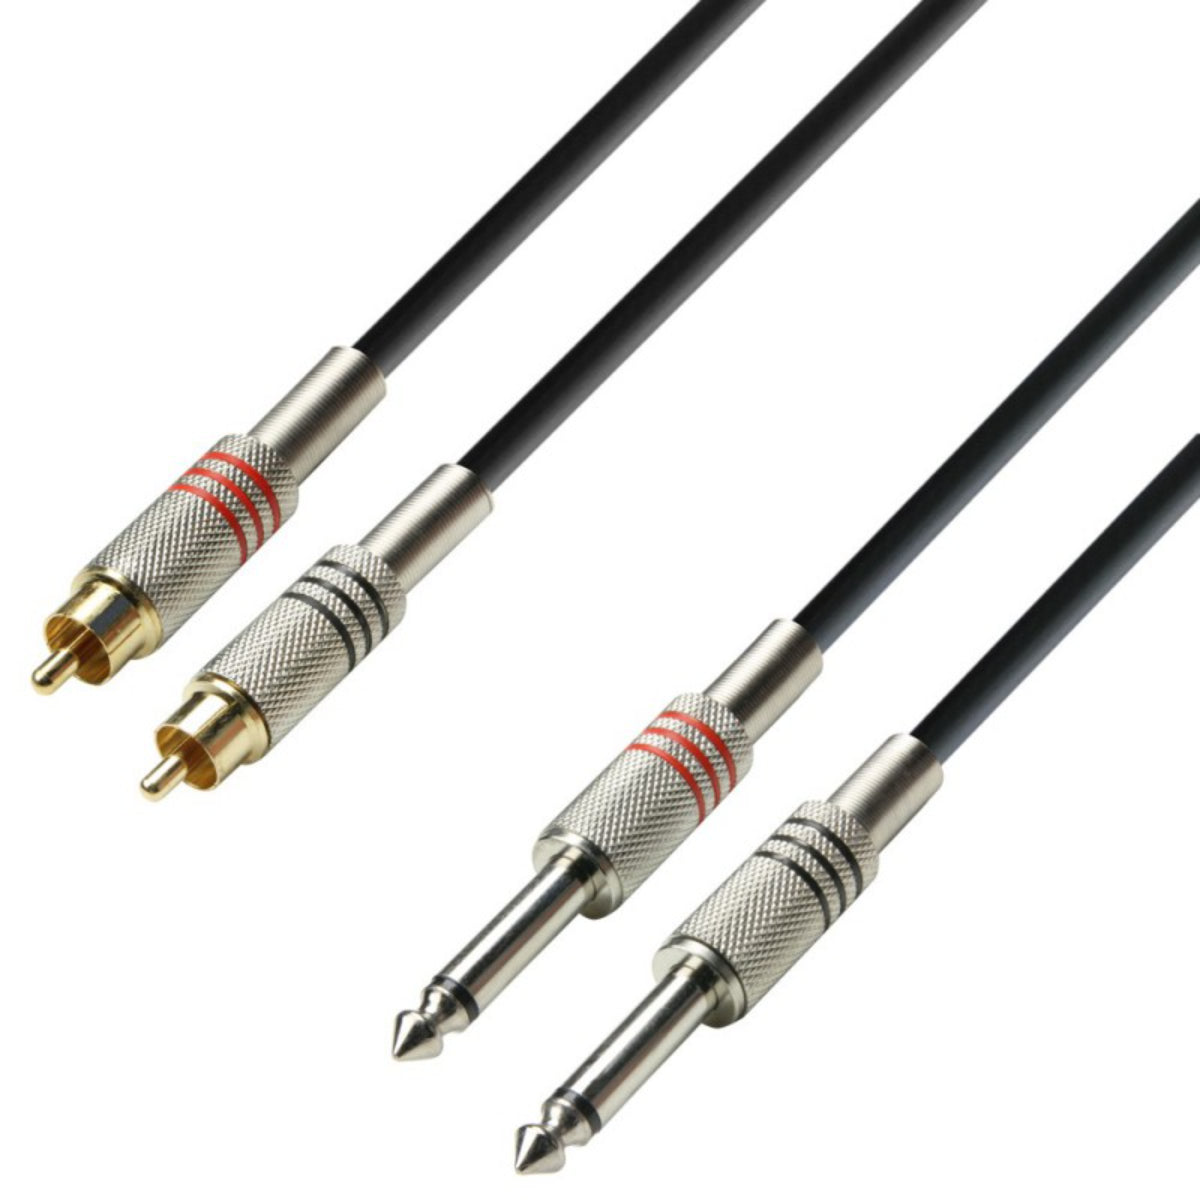 Adam Hall Cables K3 TPC 0300 - Audio Cable 2 x RCA male to 2 x 6.3mm Jack mono 3m